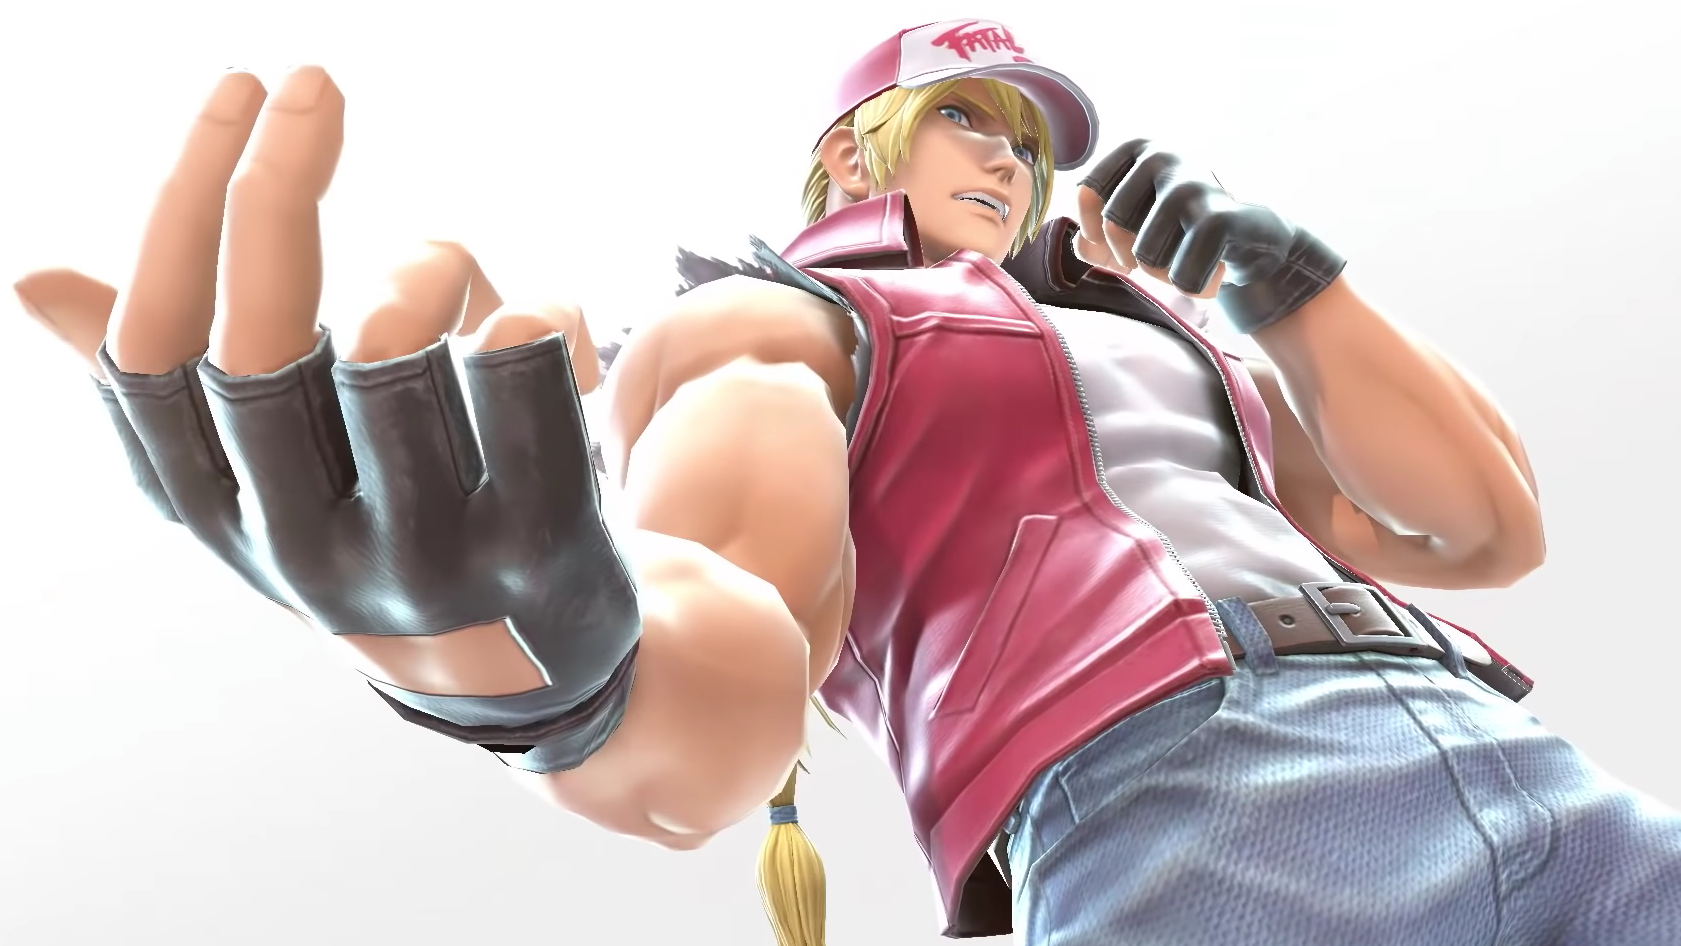 Smash Bros. Might Make A Terry Bogard Fan Out Of You